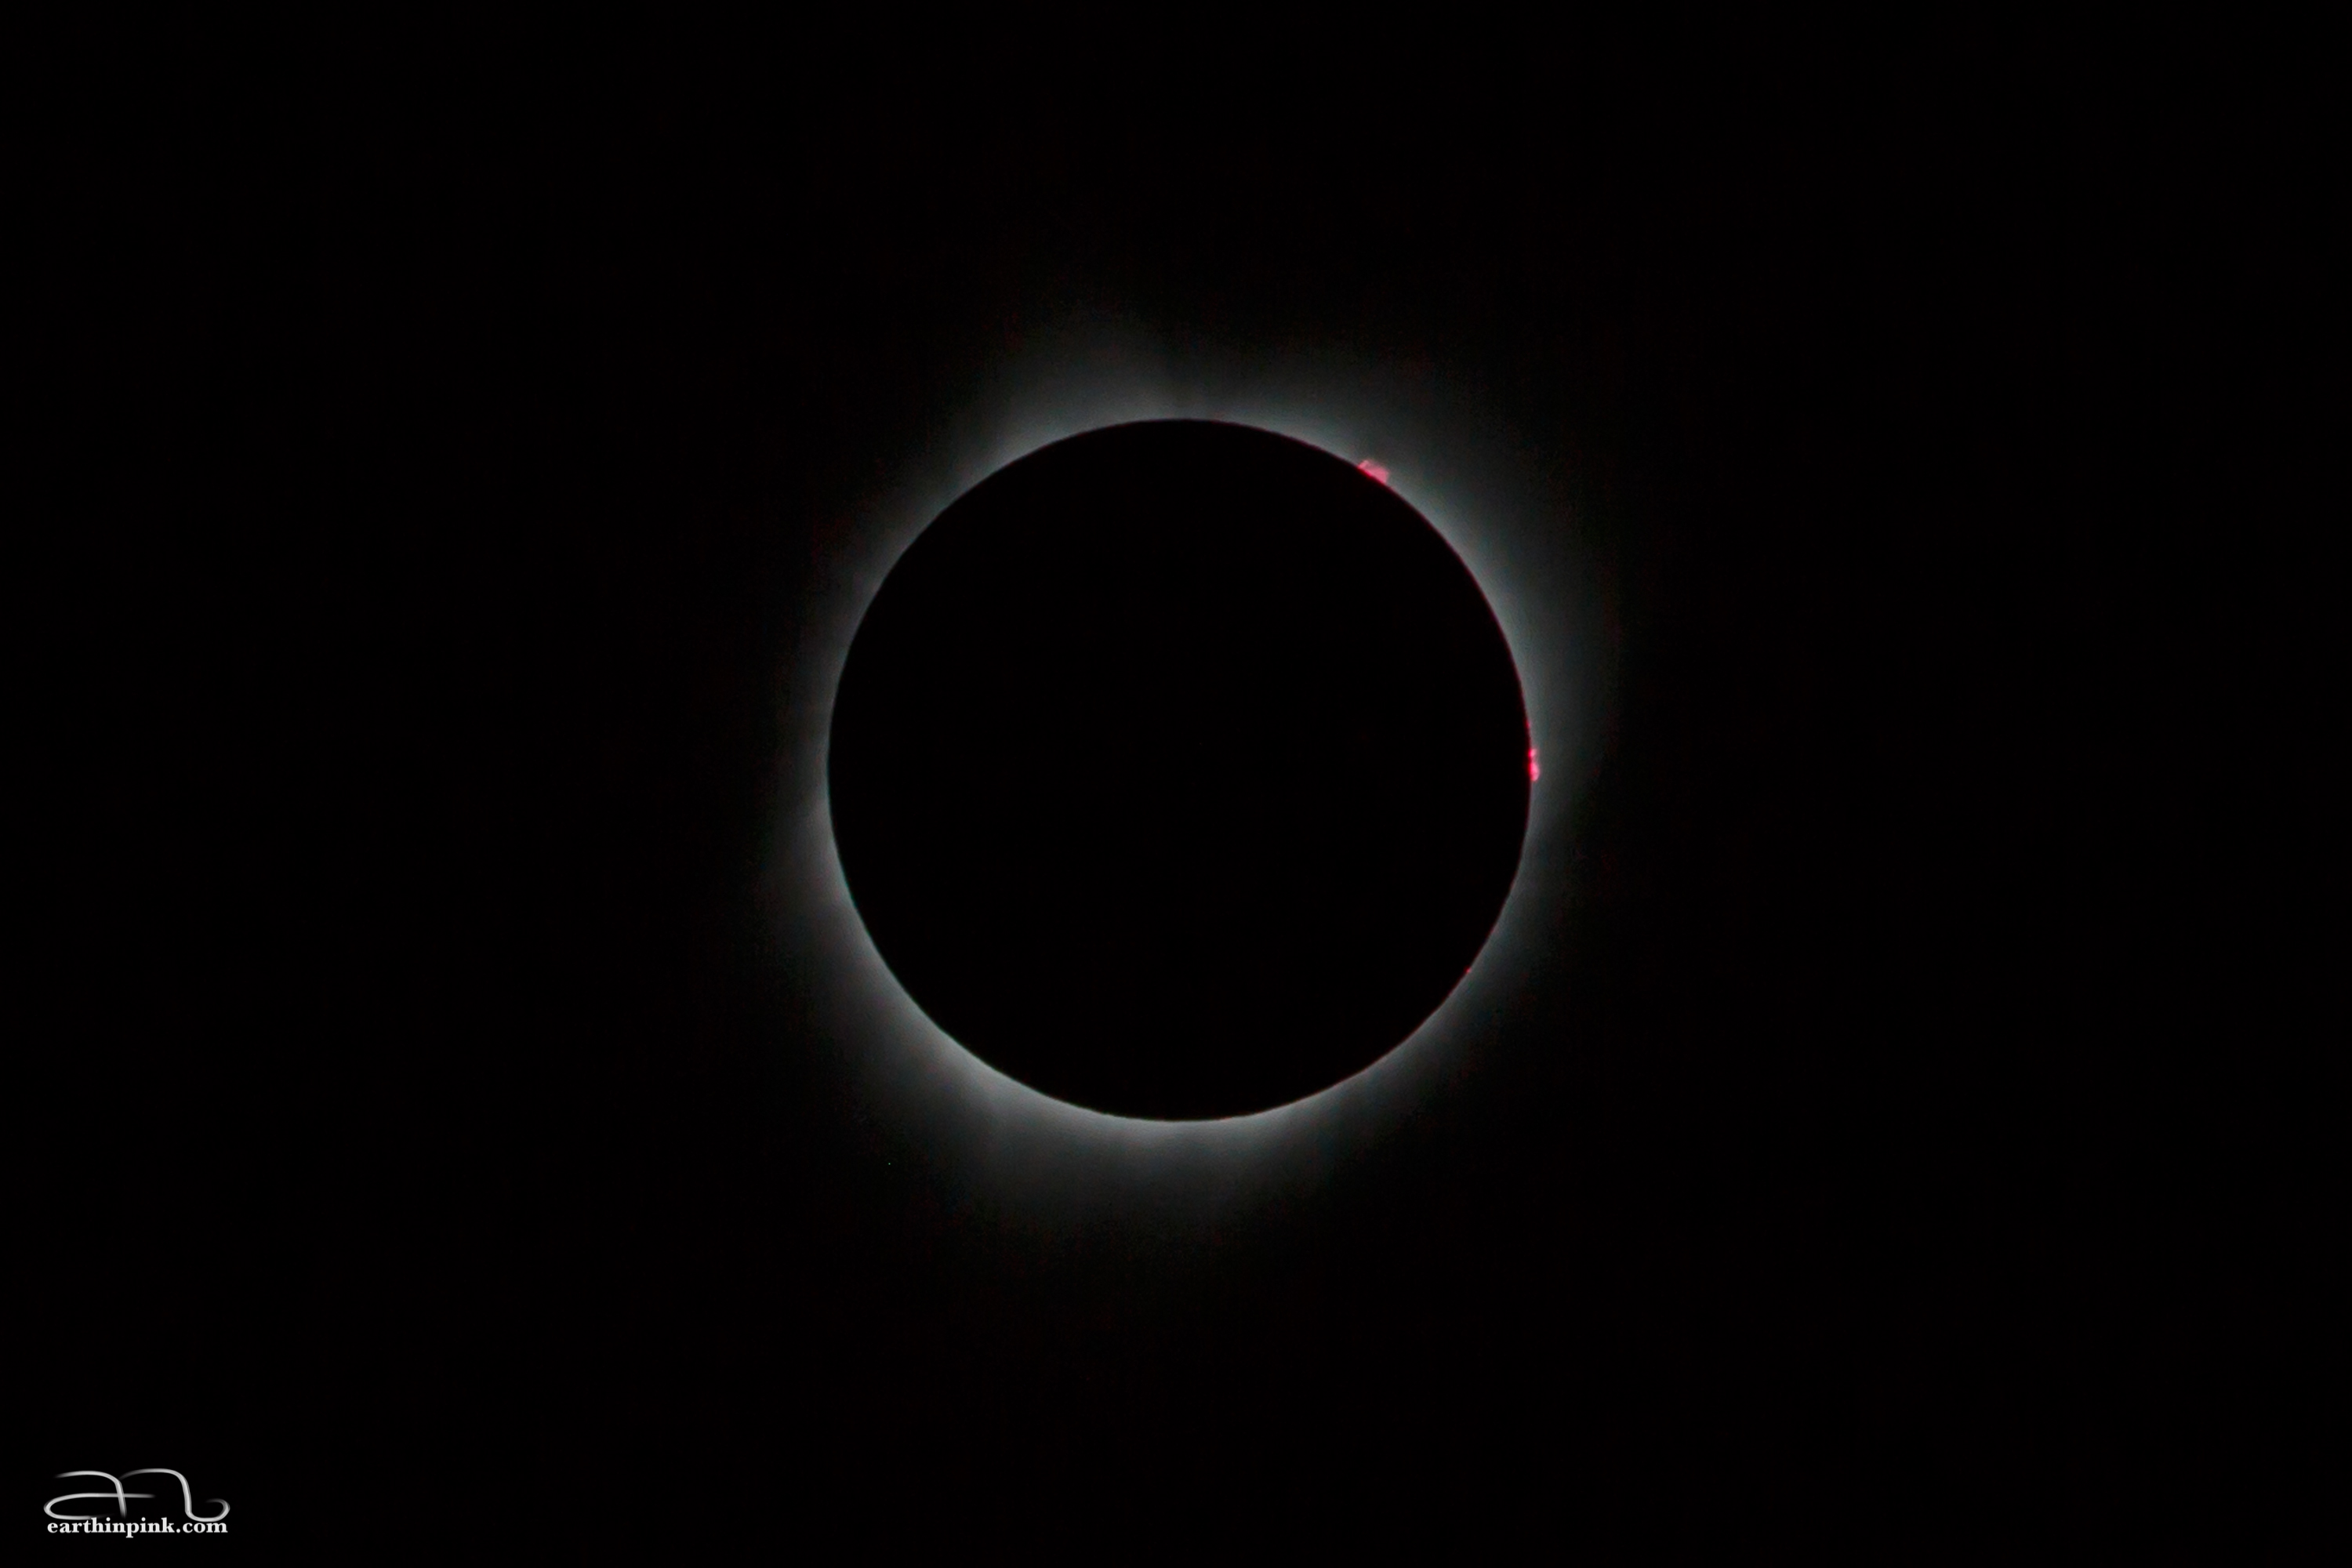 A very short exposure photo that shows the inner corona. I was impressed by the fact that the camera could capture the color of the solar prominences at the top right, which appear red because of Halpha line emission. Photography and physics combined!